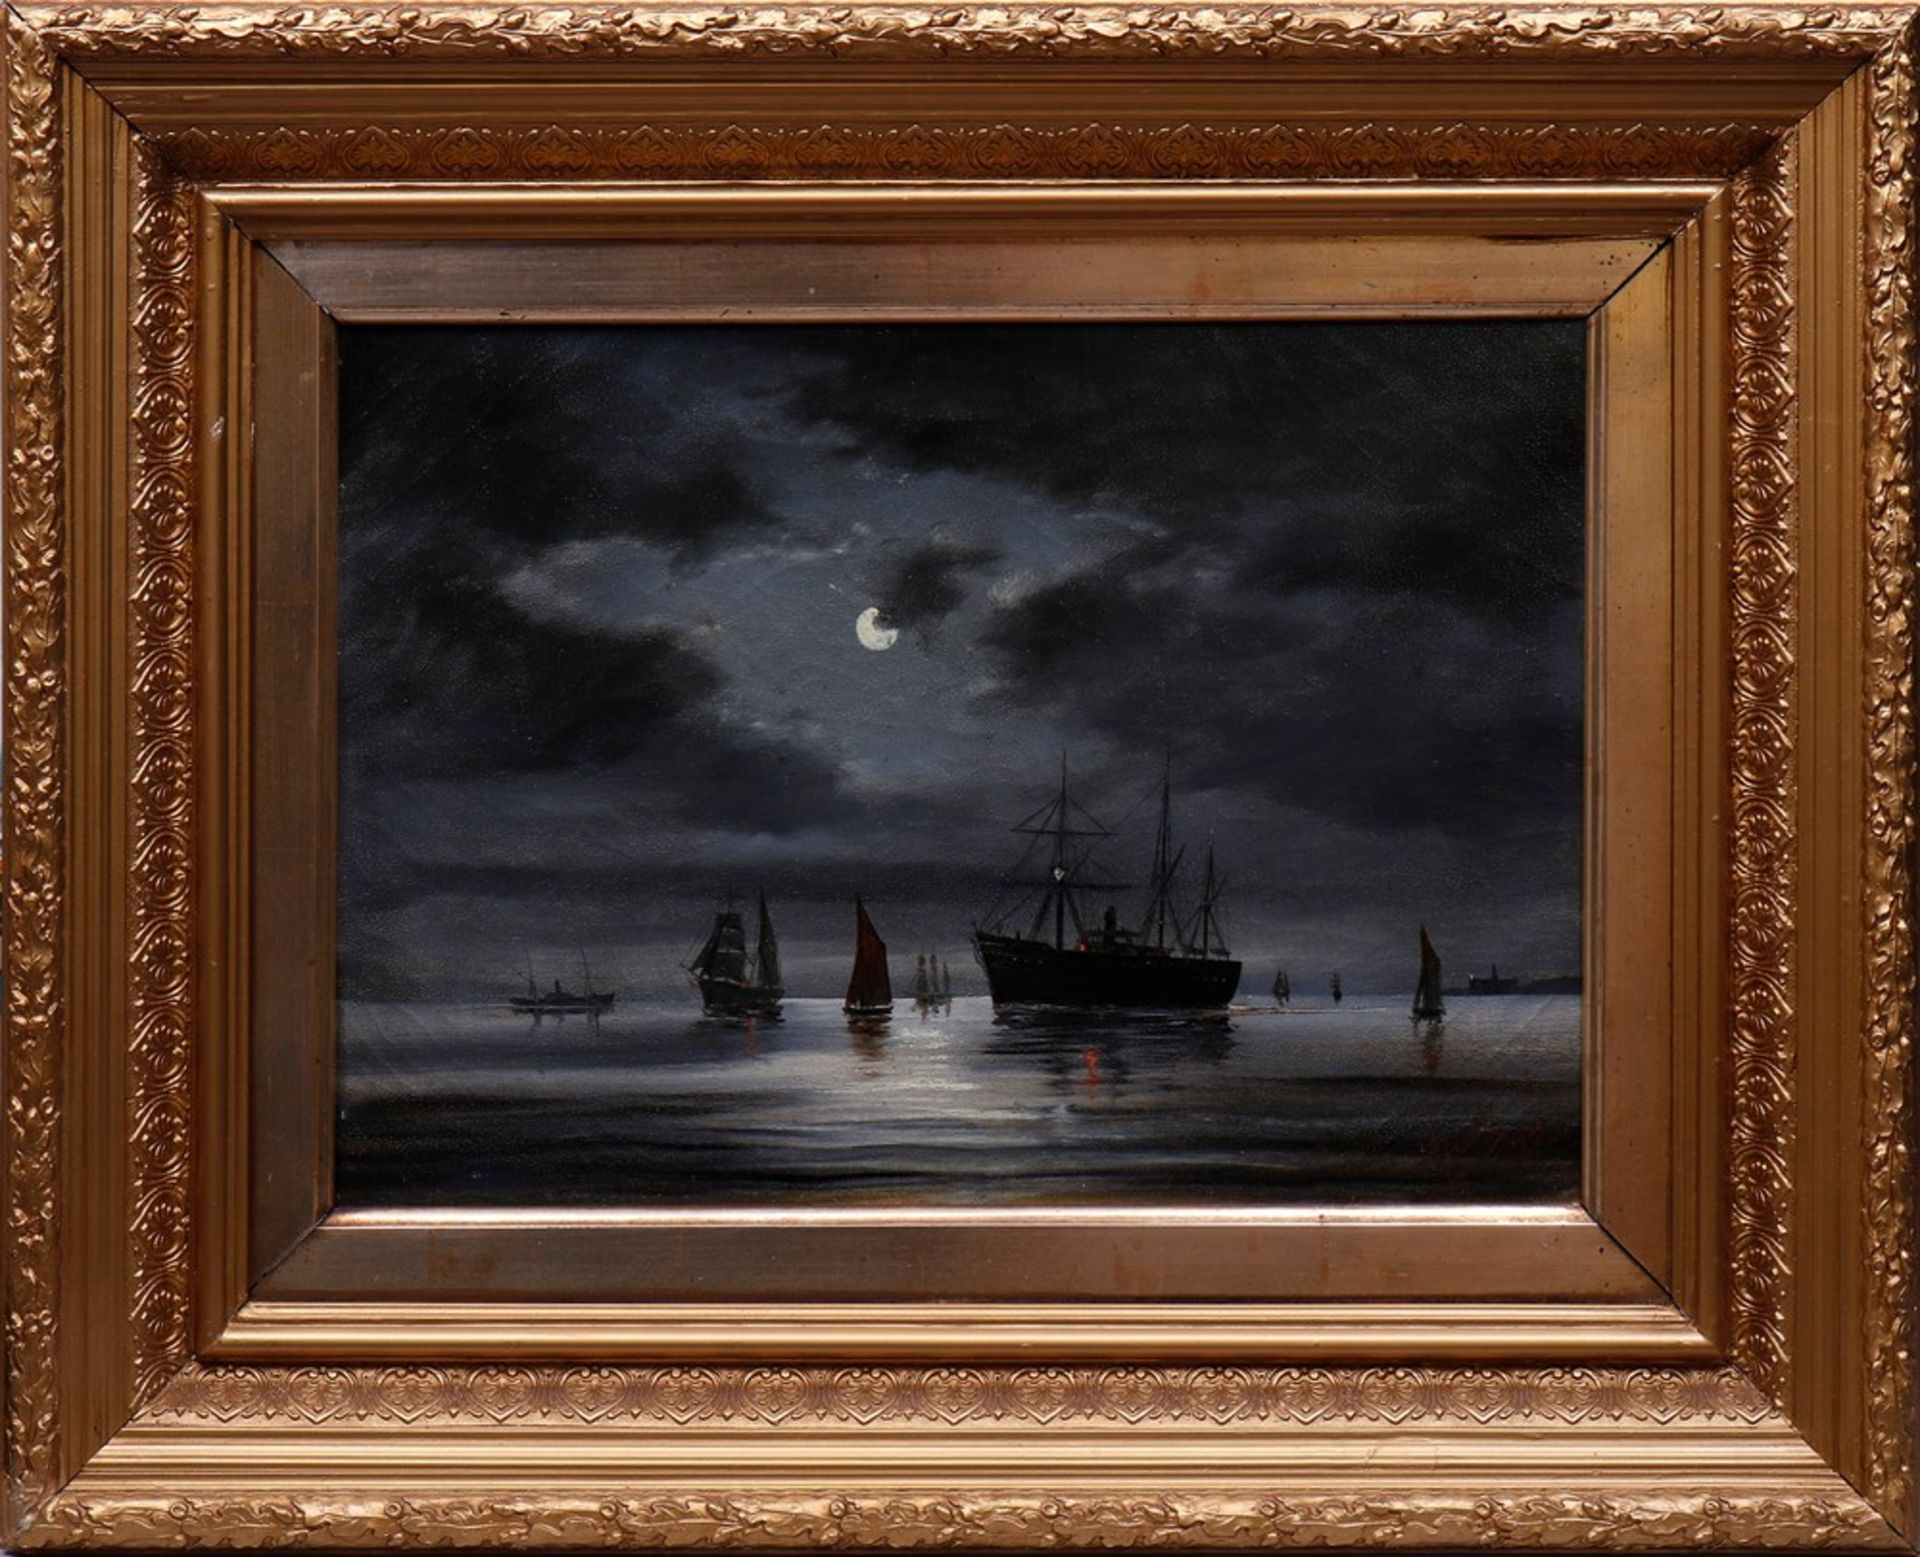 Steam ship and sailboats in the evening light, 1890